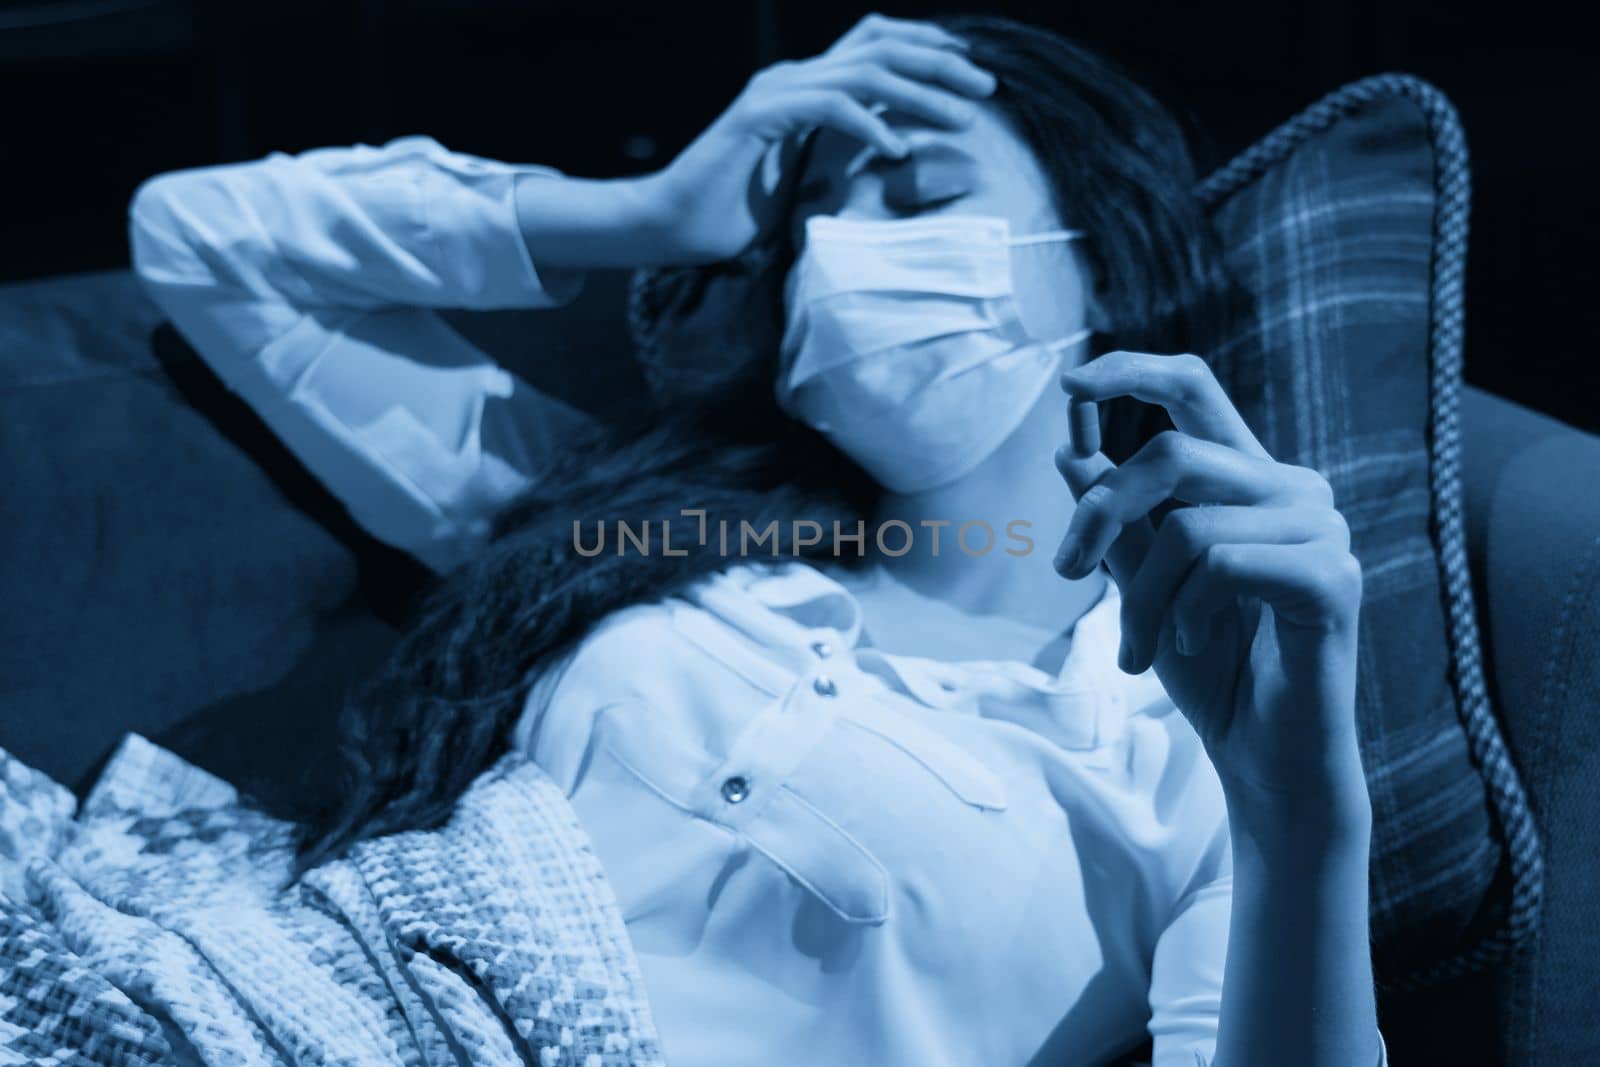 young woman on sofa covered with blanket freezing blowing running nose got fever, caught, sick girl having influenza symptoms, flu or virus concept